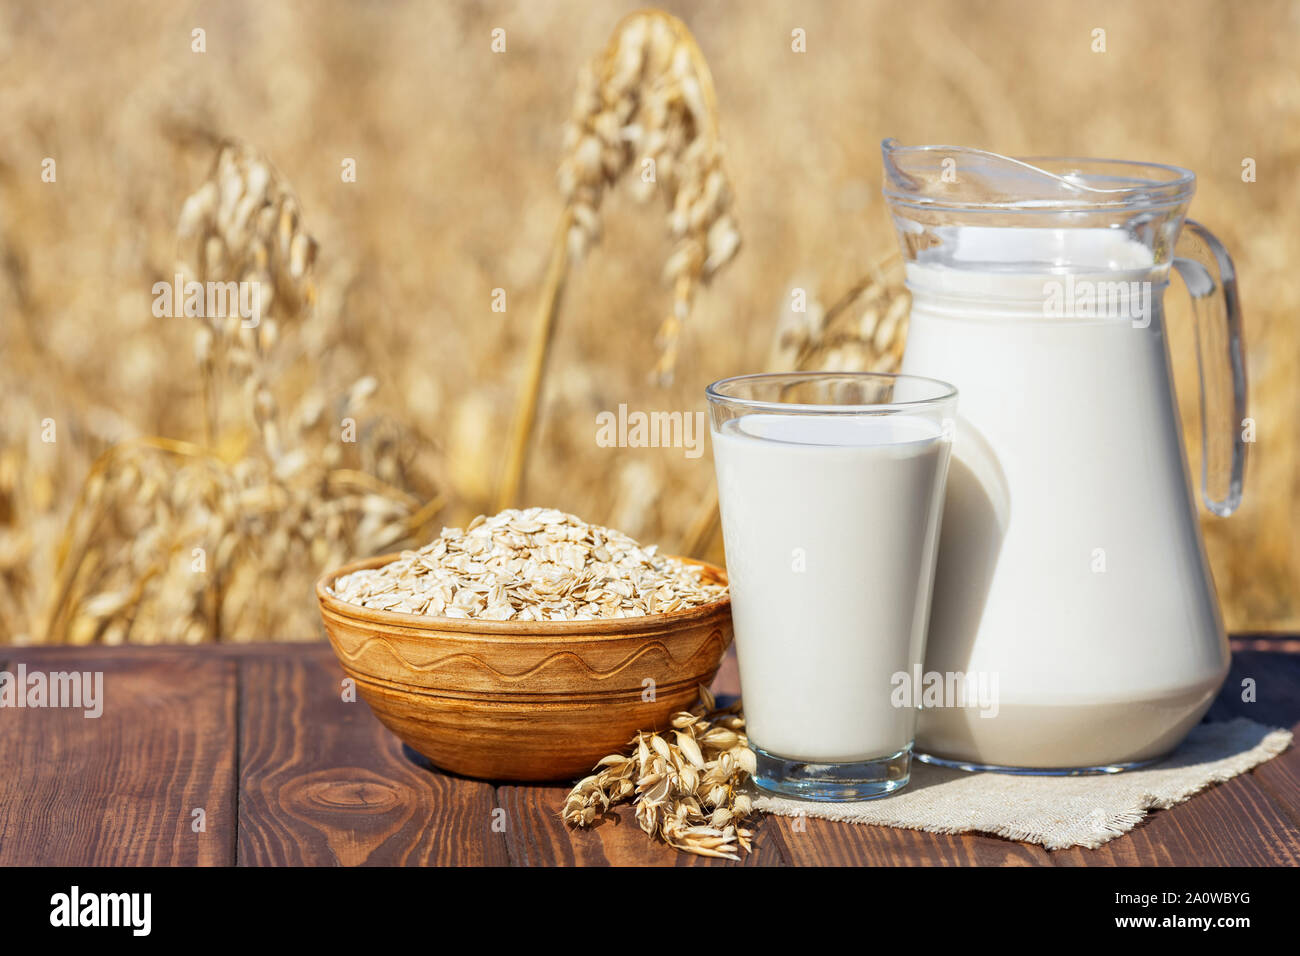 vegan oat milk in glass and jug with uncooked oatmeal in bowl on table over against ripe cereal field Stock Photo